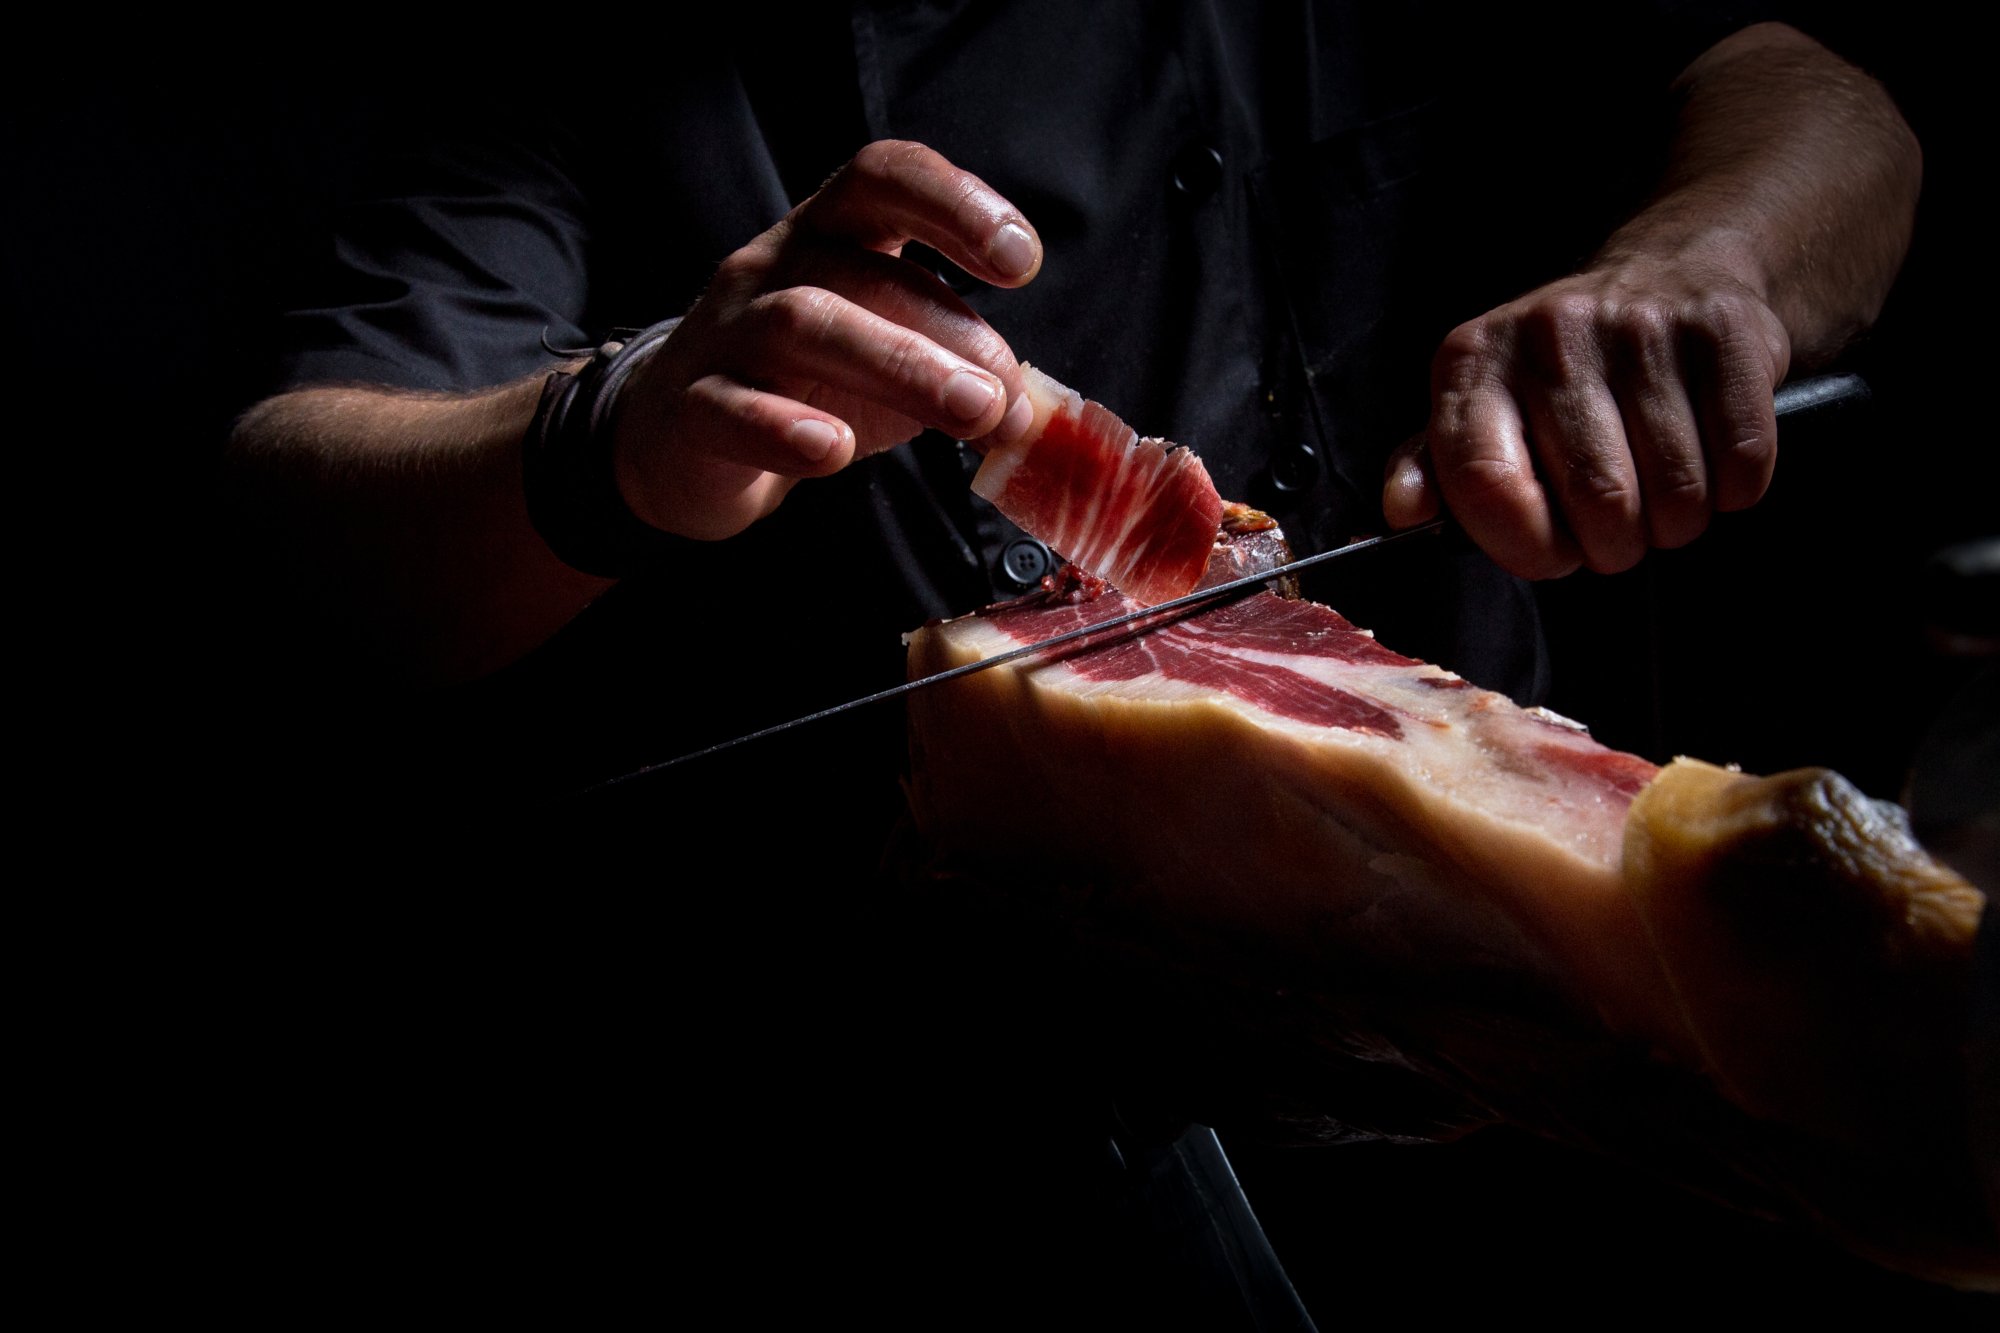 Cutting ham with a knife